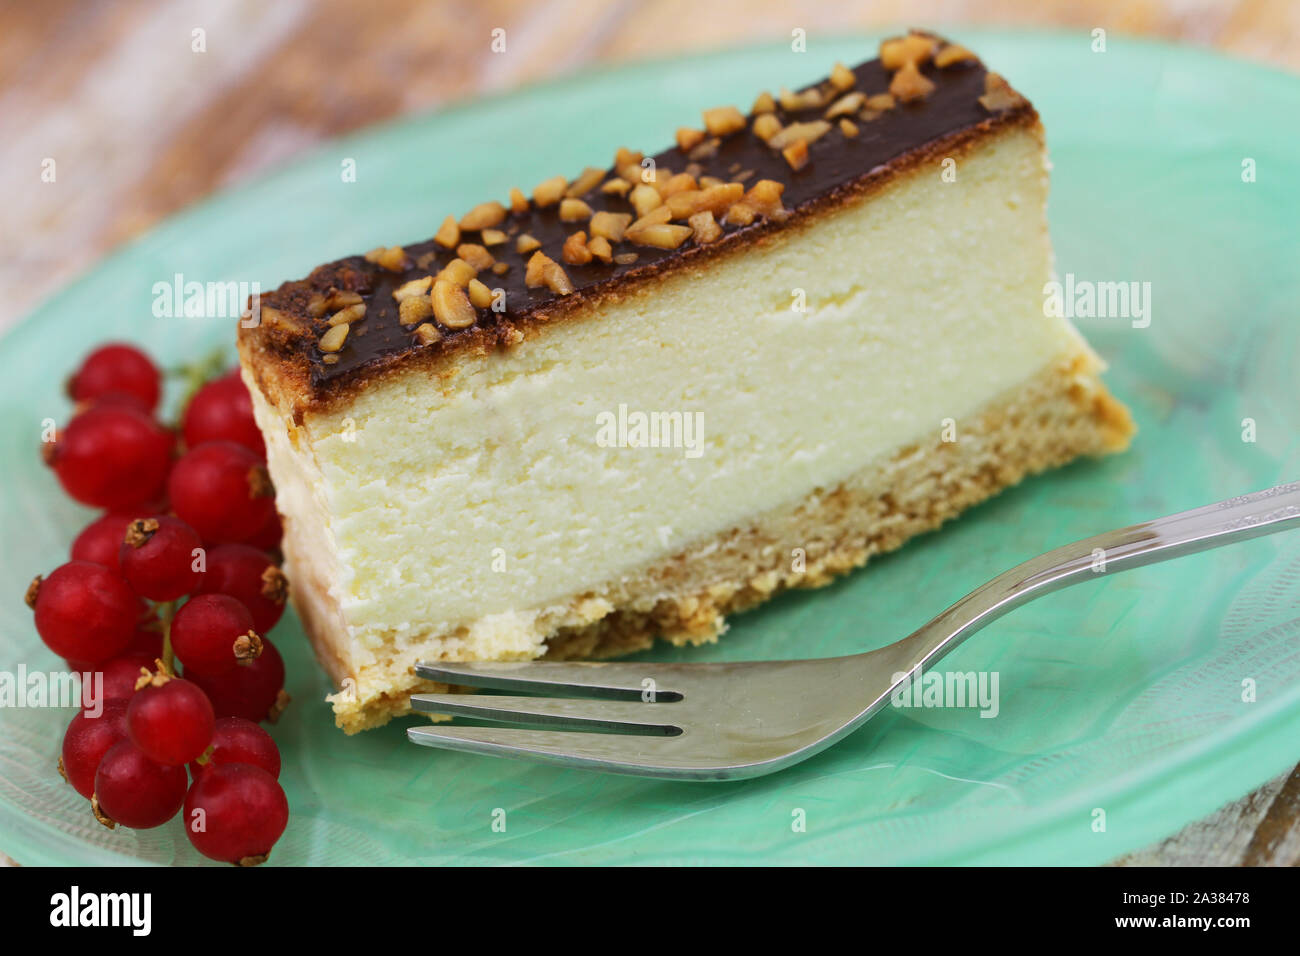 Slice of baked Polish cheesecake with chocolate topping and chopped nuts Stock Photo